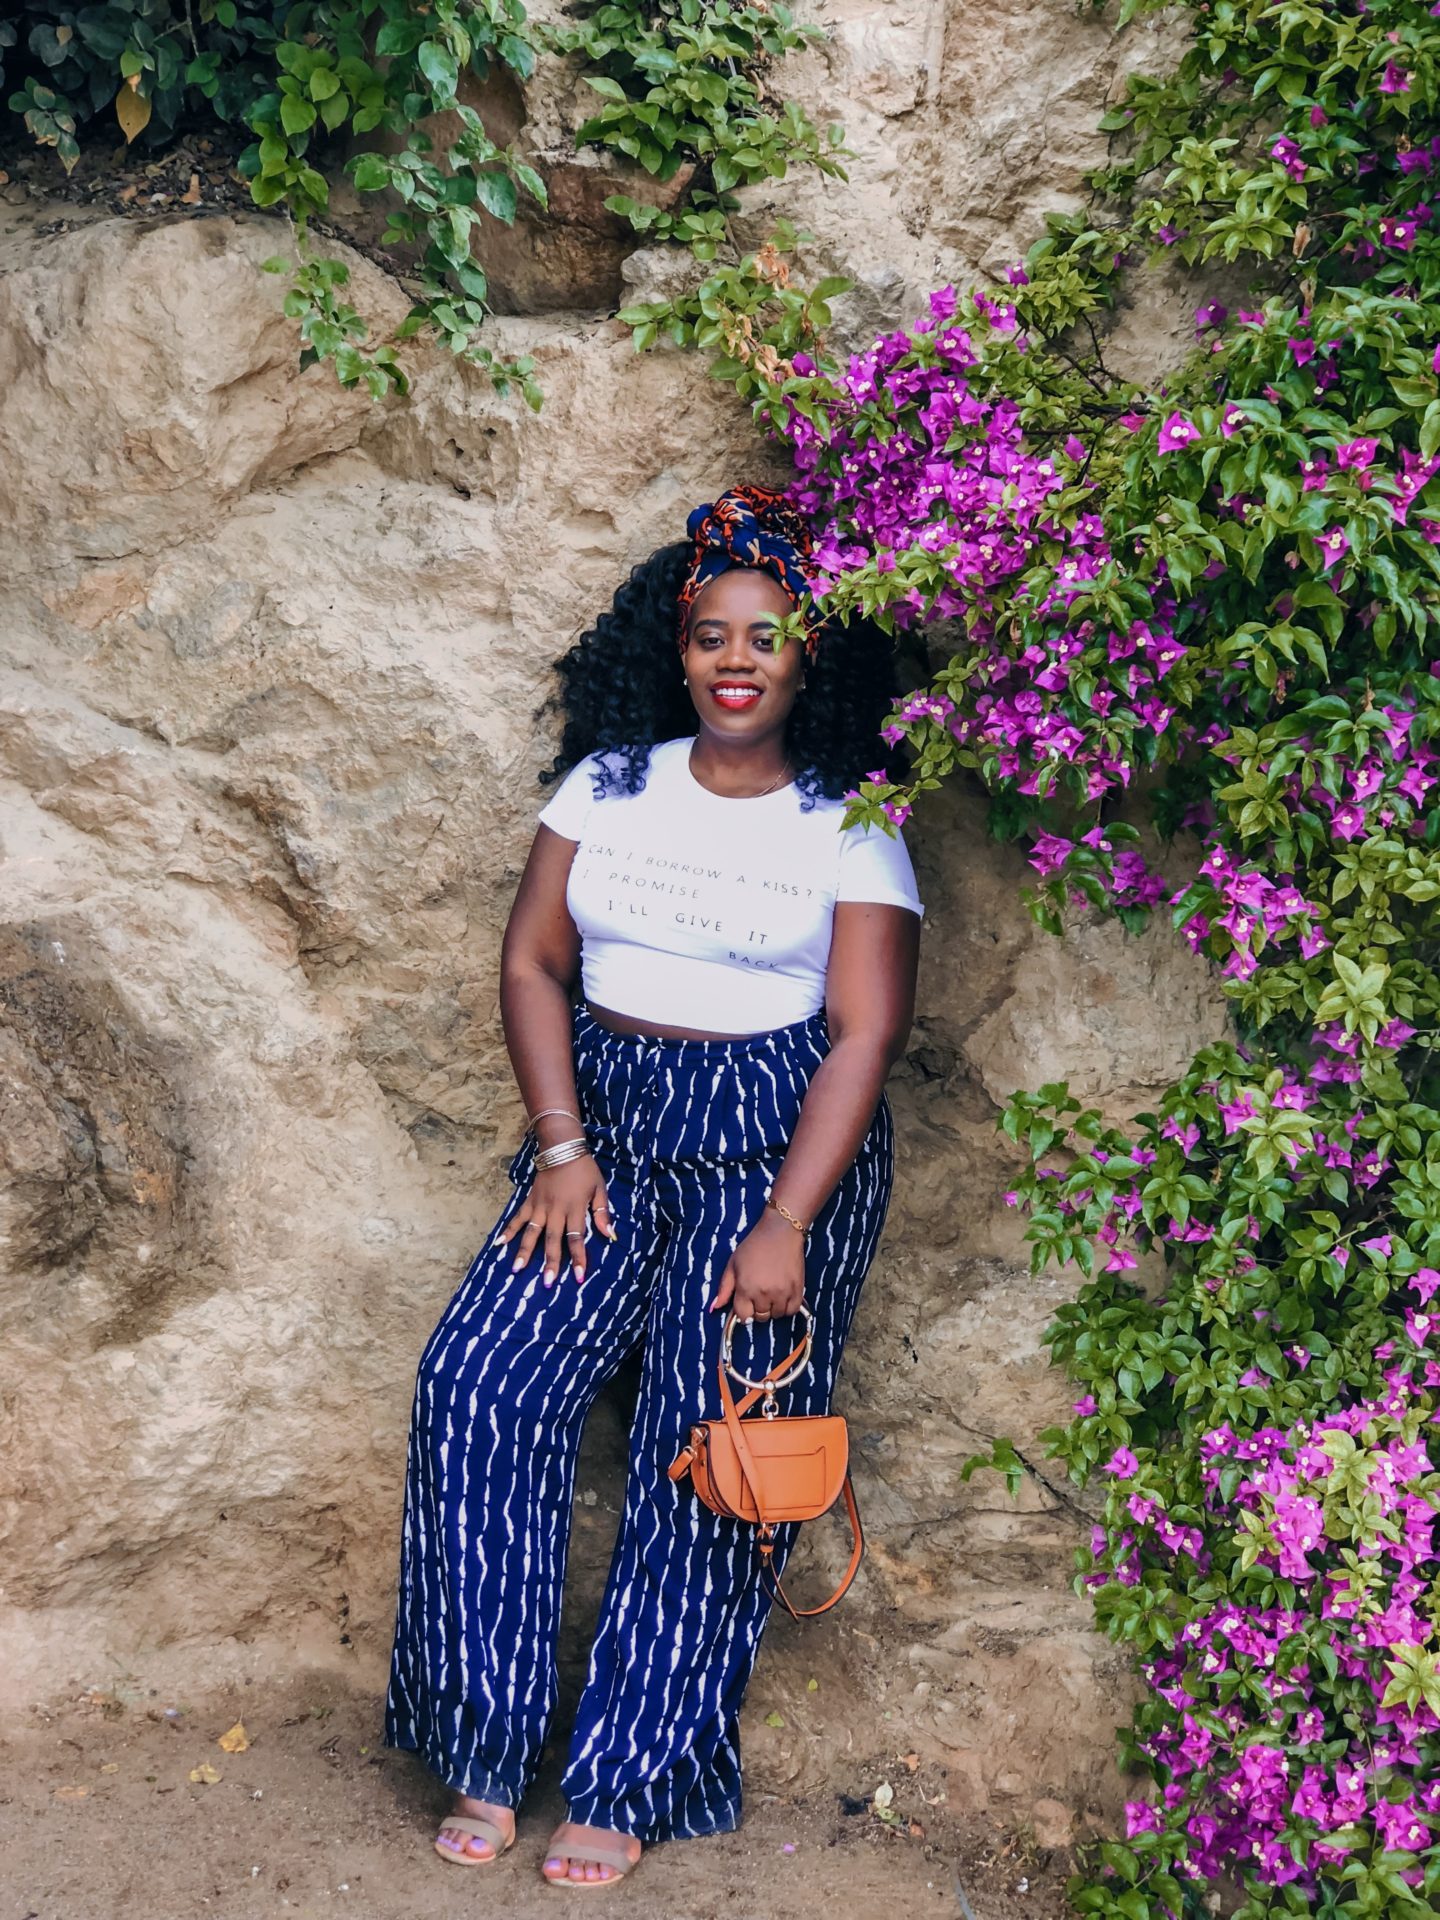 African, African Blogger, Boston Blogger, Spain, Barcelona, Africancocktail, African cocktail, Primark, Parc Guell, Gaudi